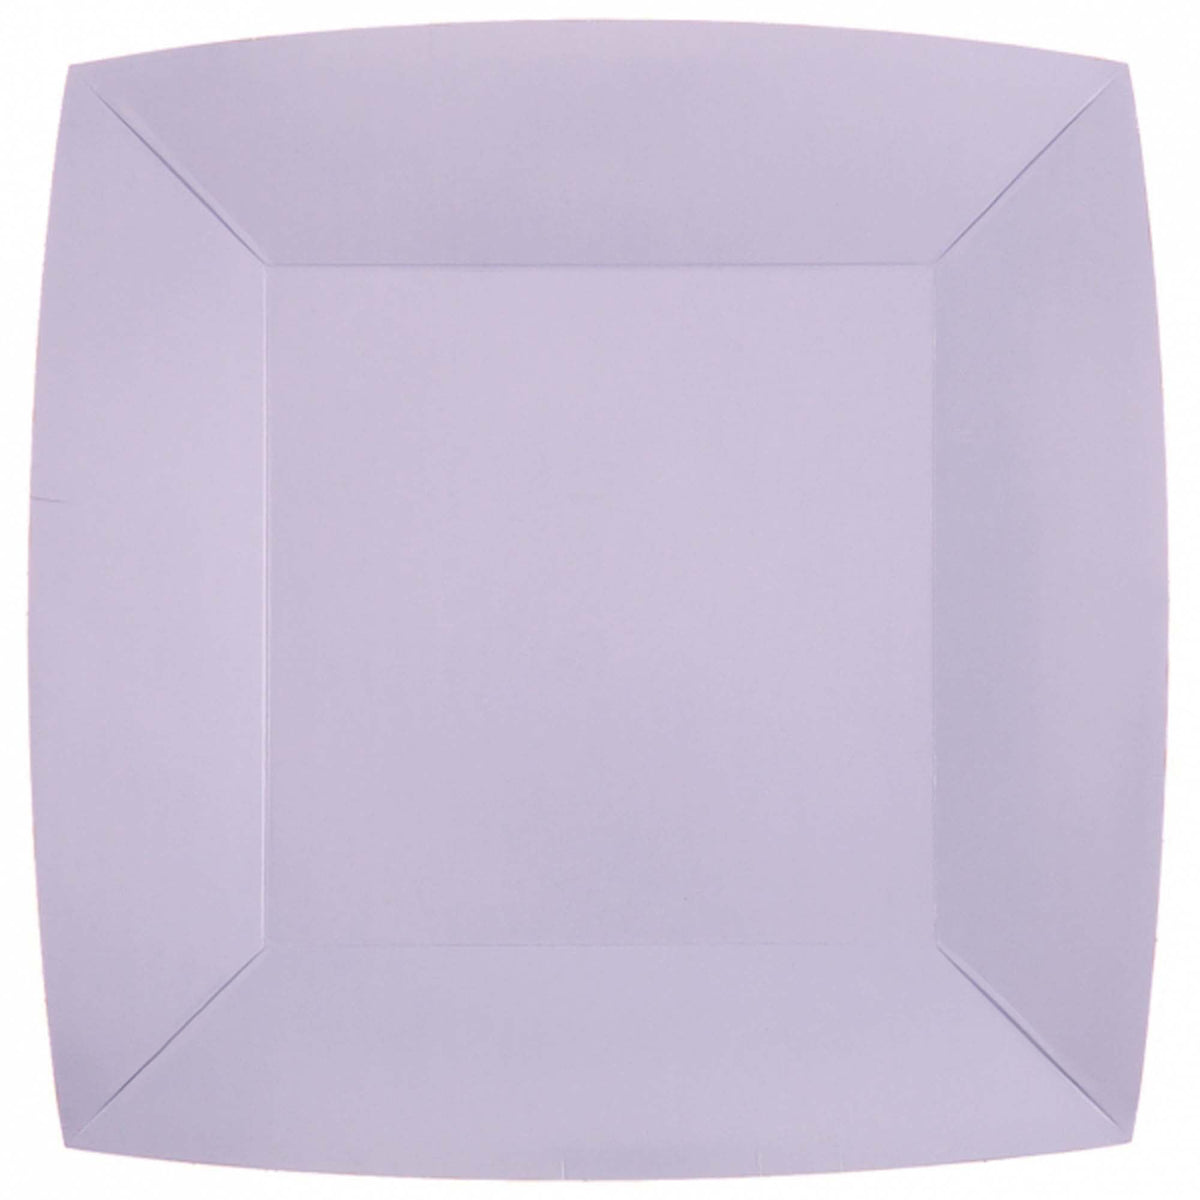 SANTEX Everyday Entertaining Violet Large Square Lunch Party Paper Plates, 9 Inches, 10 Count